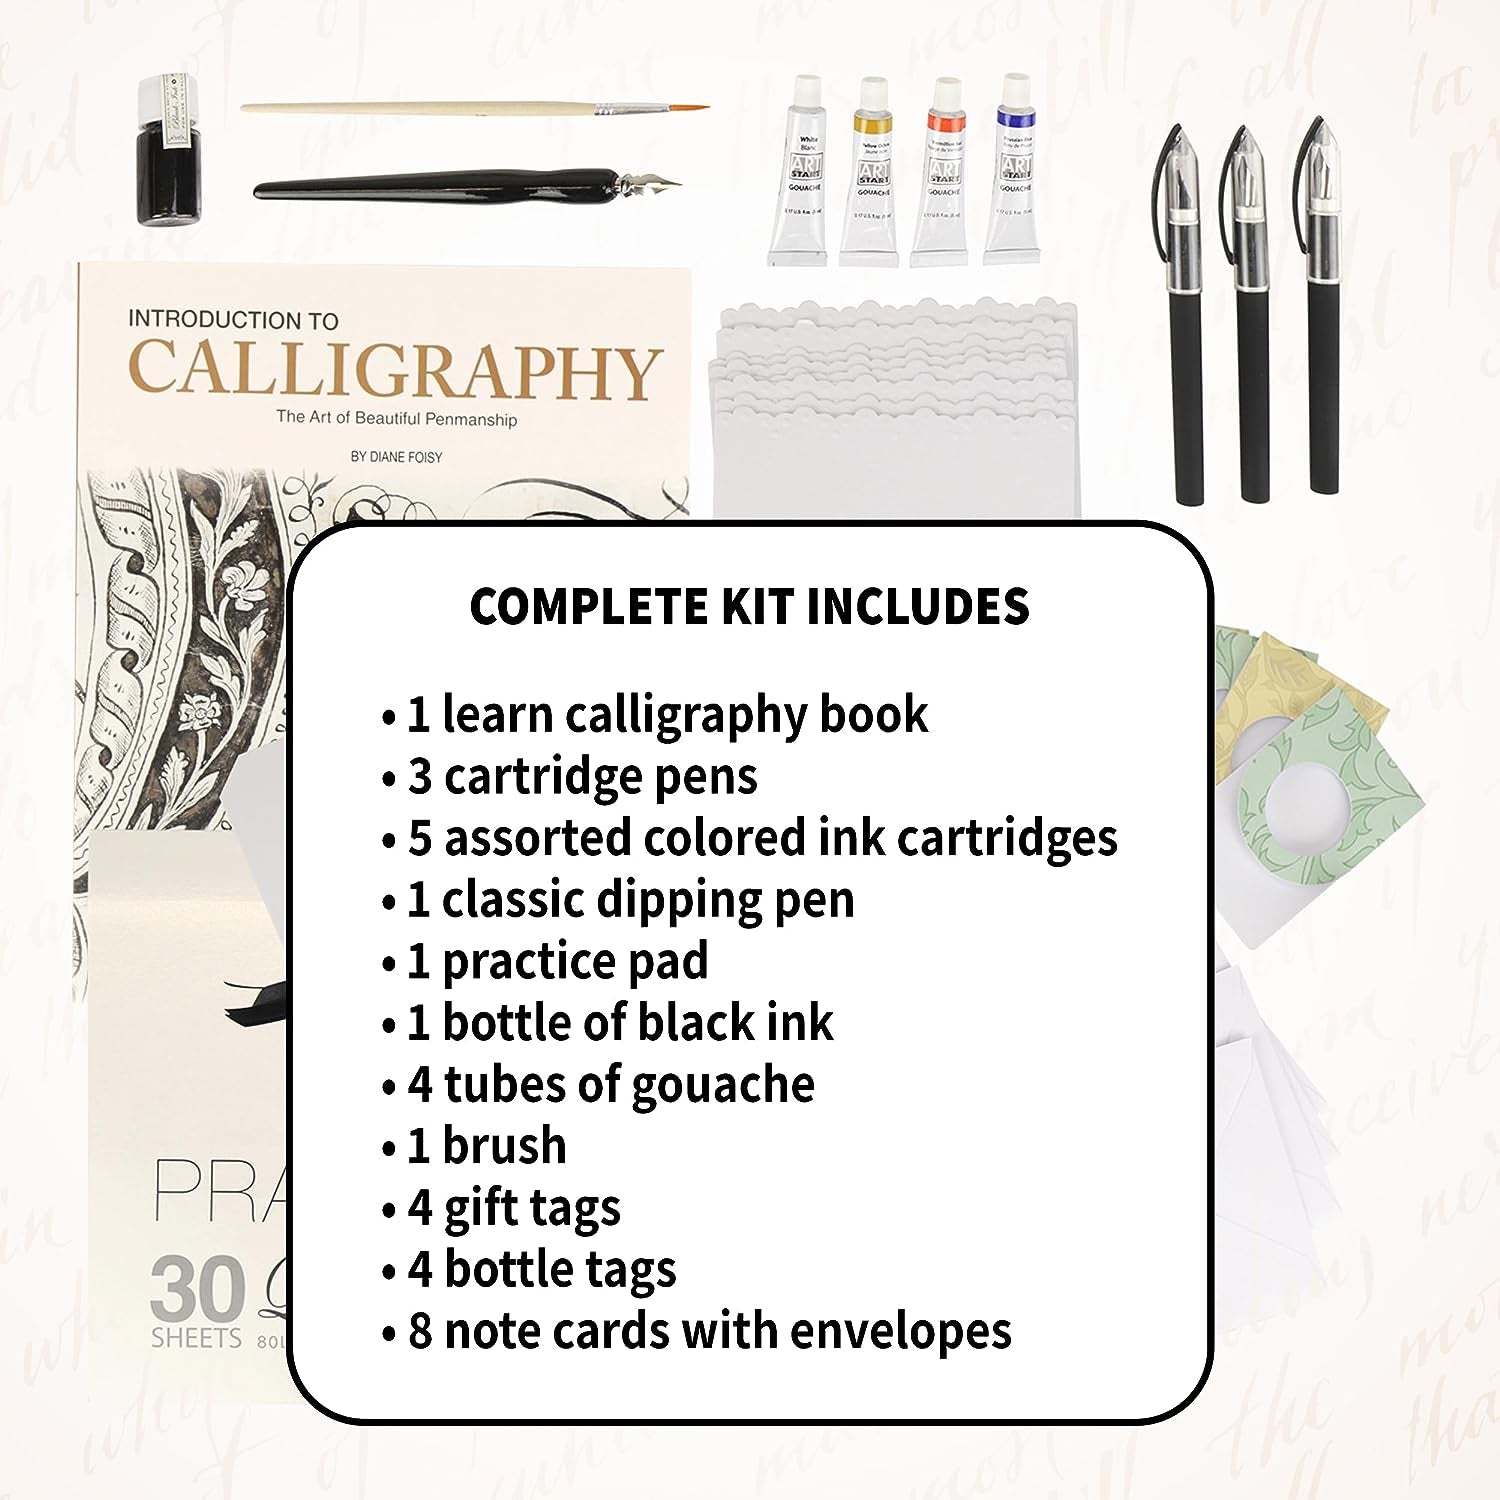 Introduction to Calligraphy Kit - Master the Art of Beautiful Writing - Unleash Your Inner Artist!